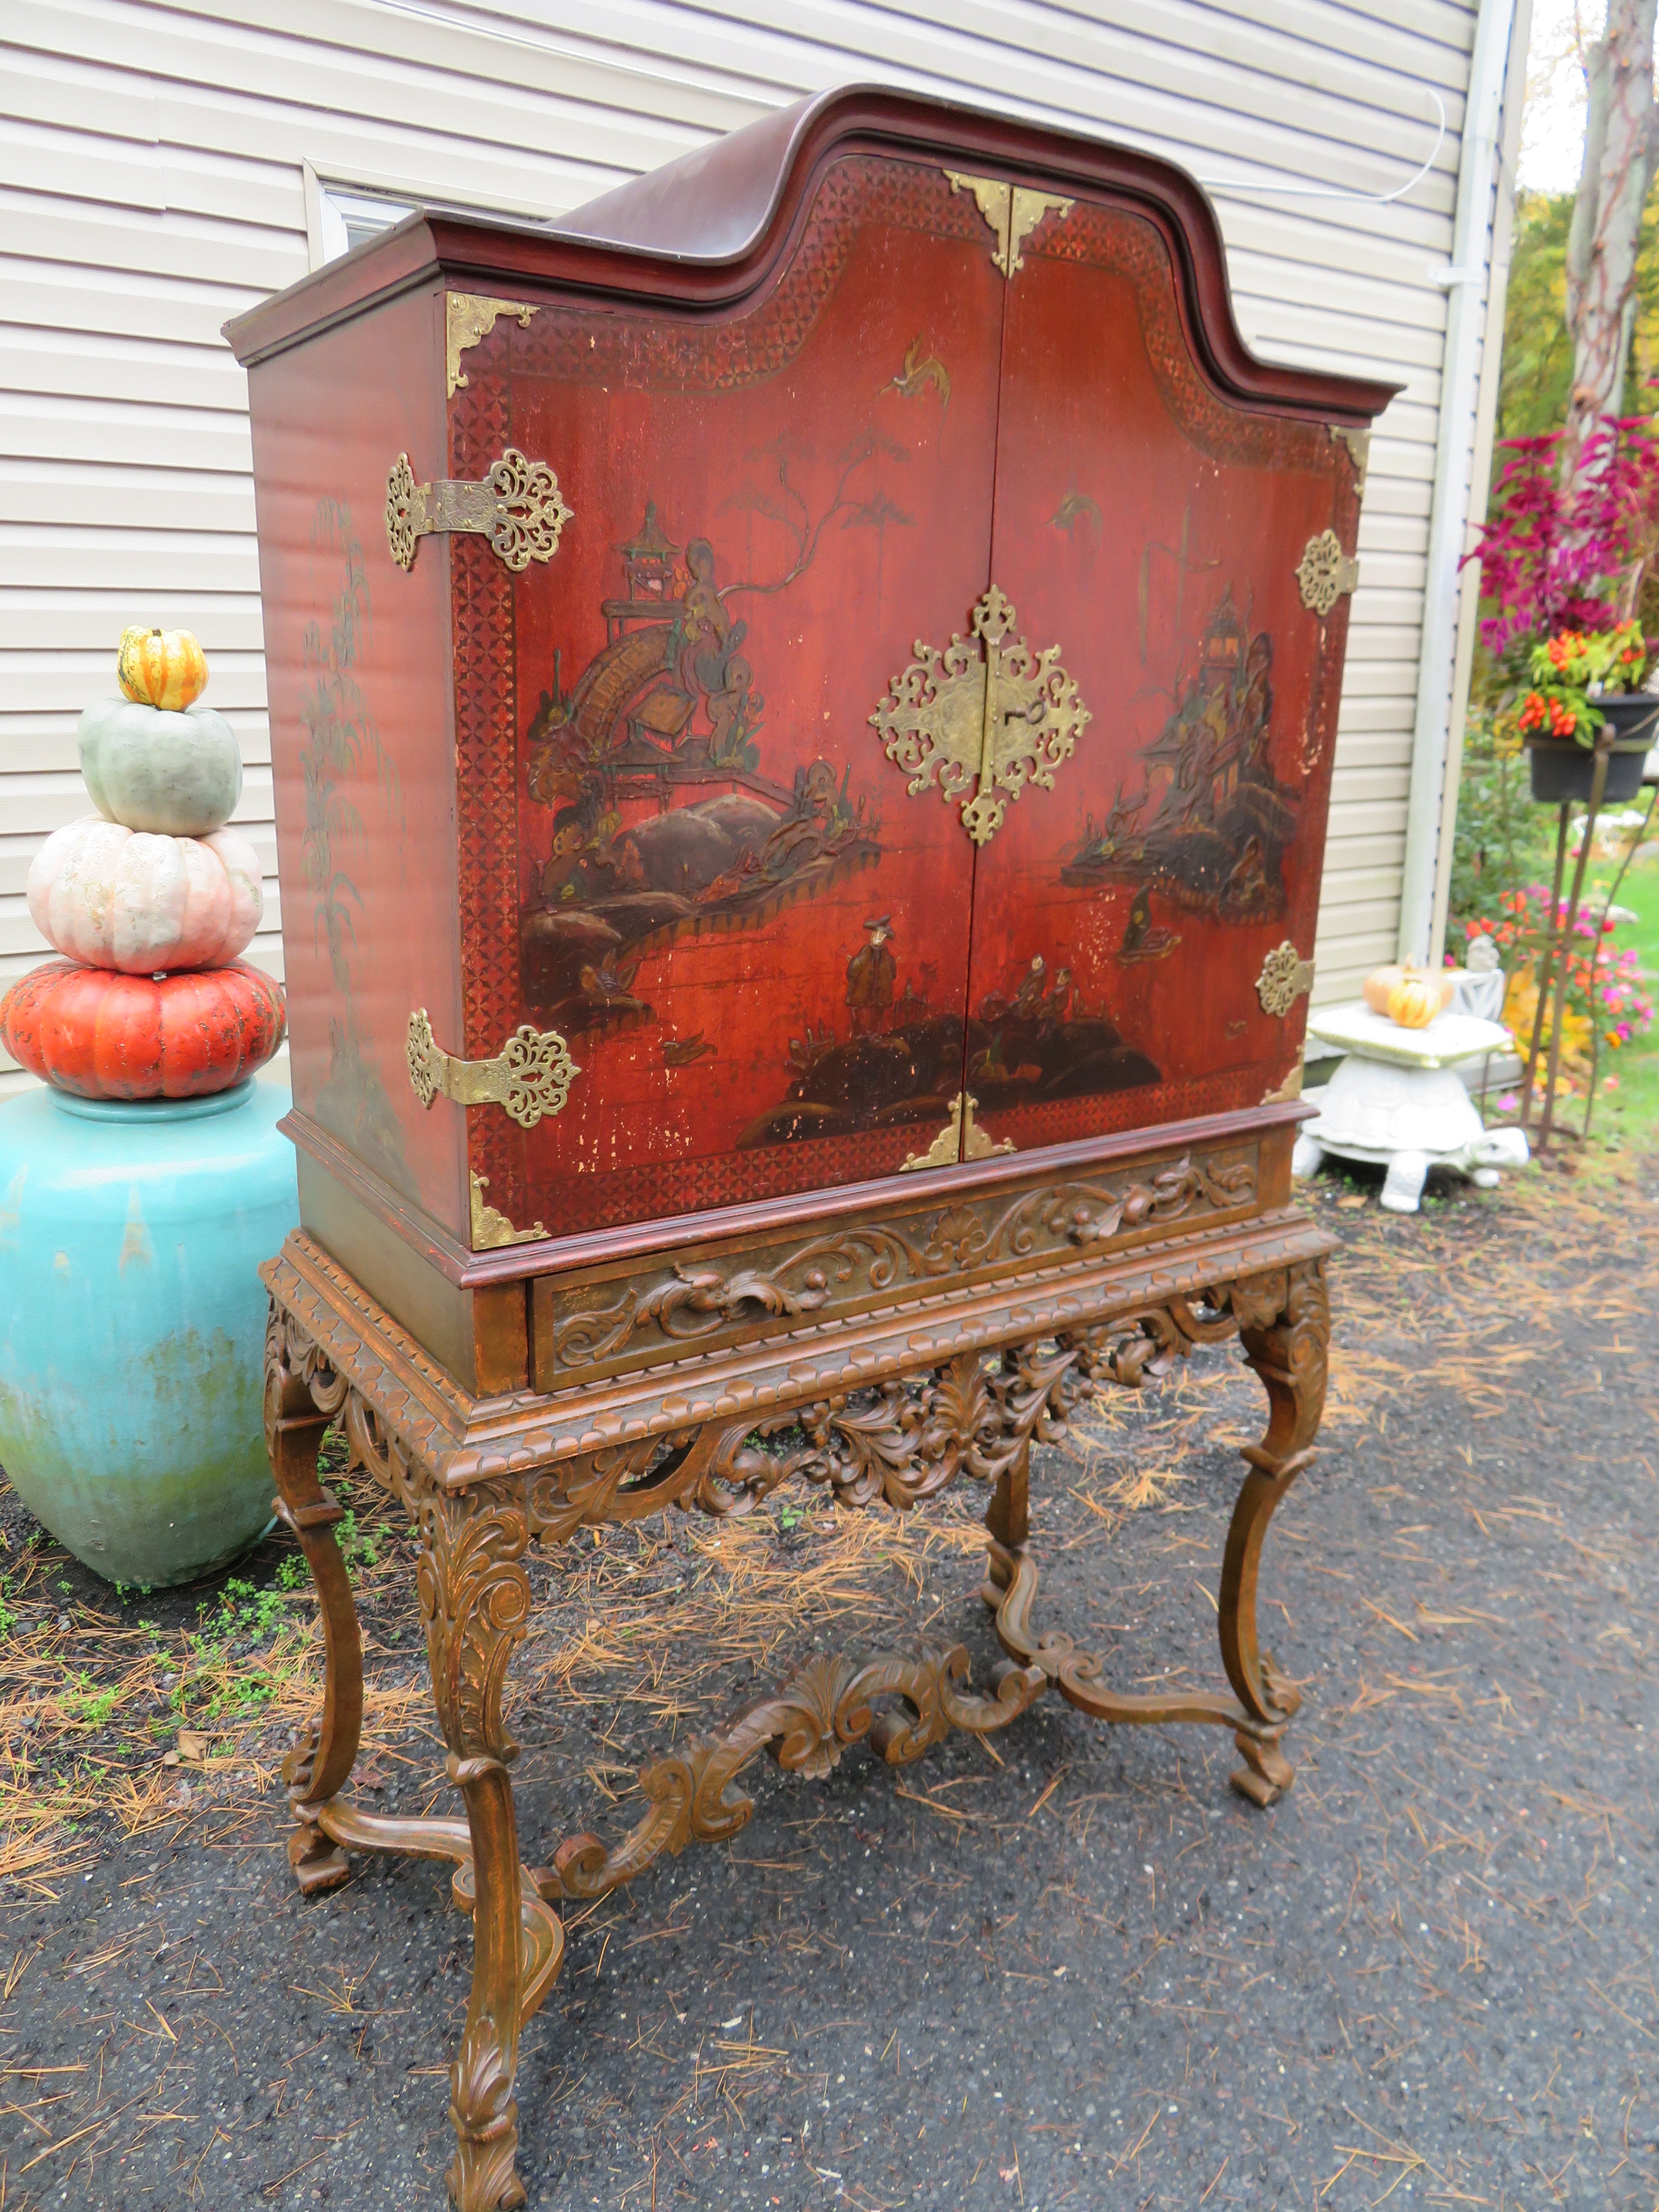 Stunning well-carved walnut Chinoiserie decorated China closet cabinet. We love everything about this beautifully decorated Chinese linen cabinet from the well-carved legs and stretchers to the handpainted case with brass hardware. There are 2